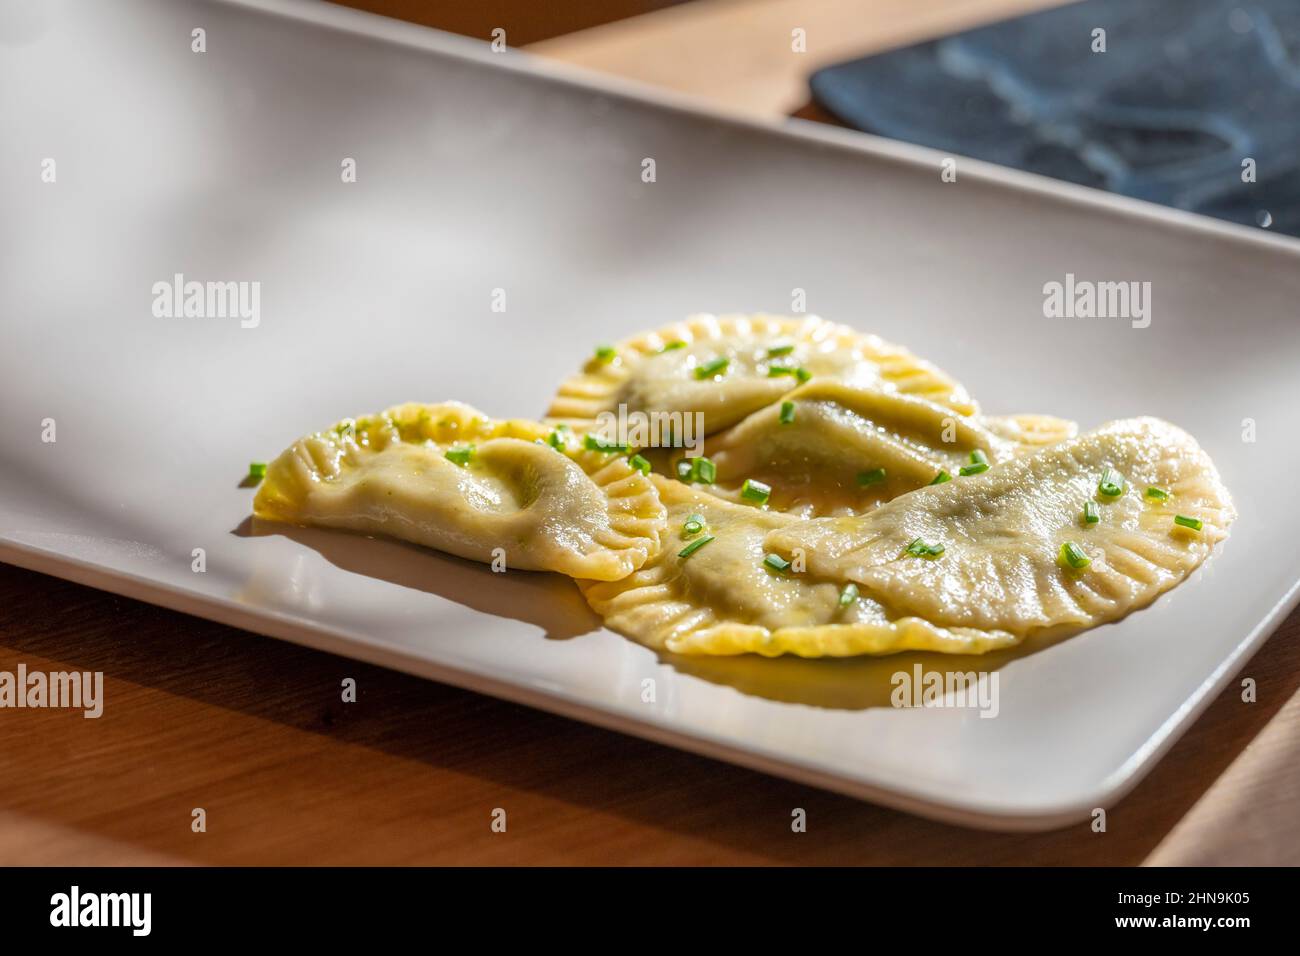 homemade tyrolean dumplings with spinach filling served on a white plate with chives Stock Photo